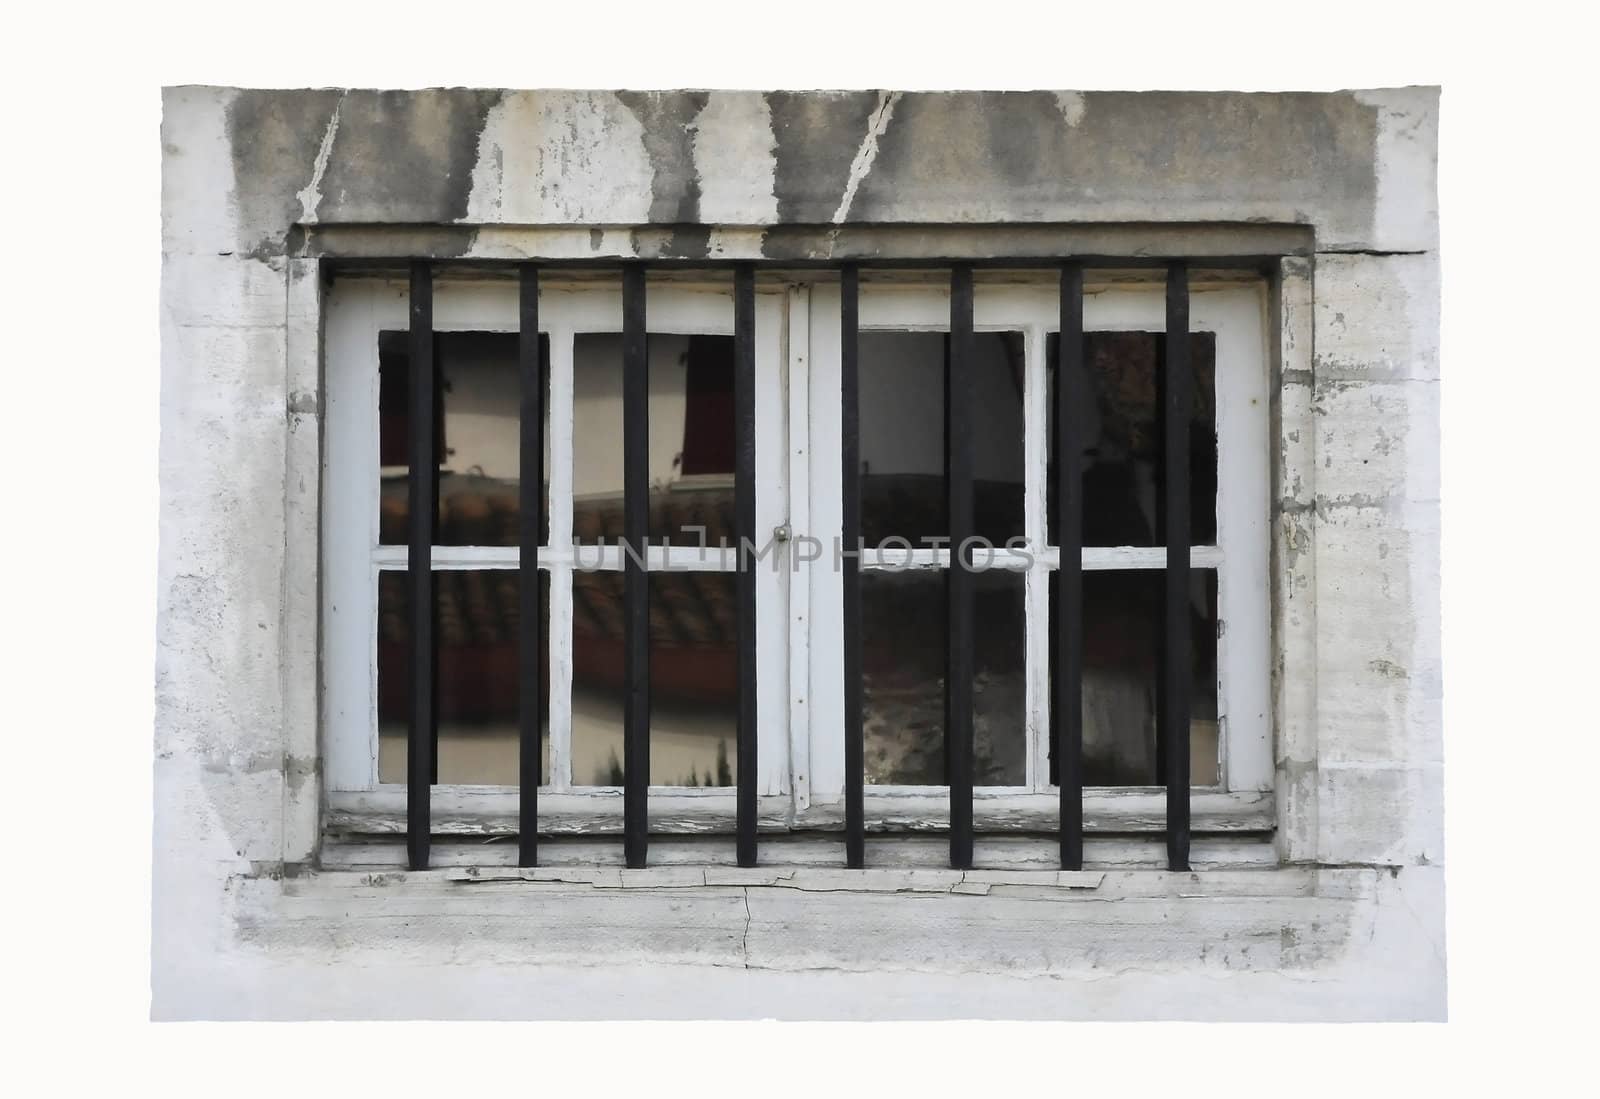 White little window isolated with black bars and dirty stone